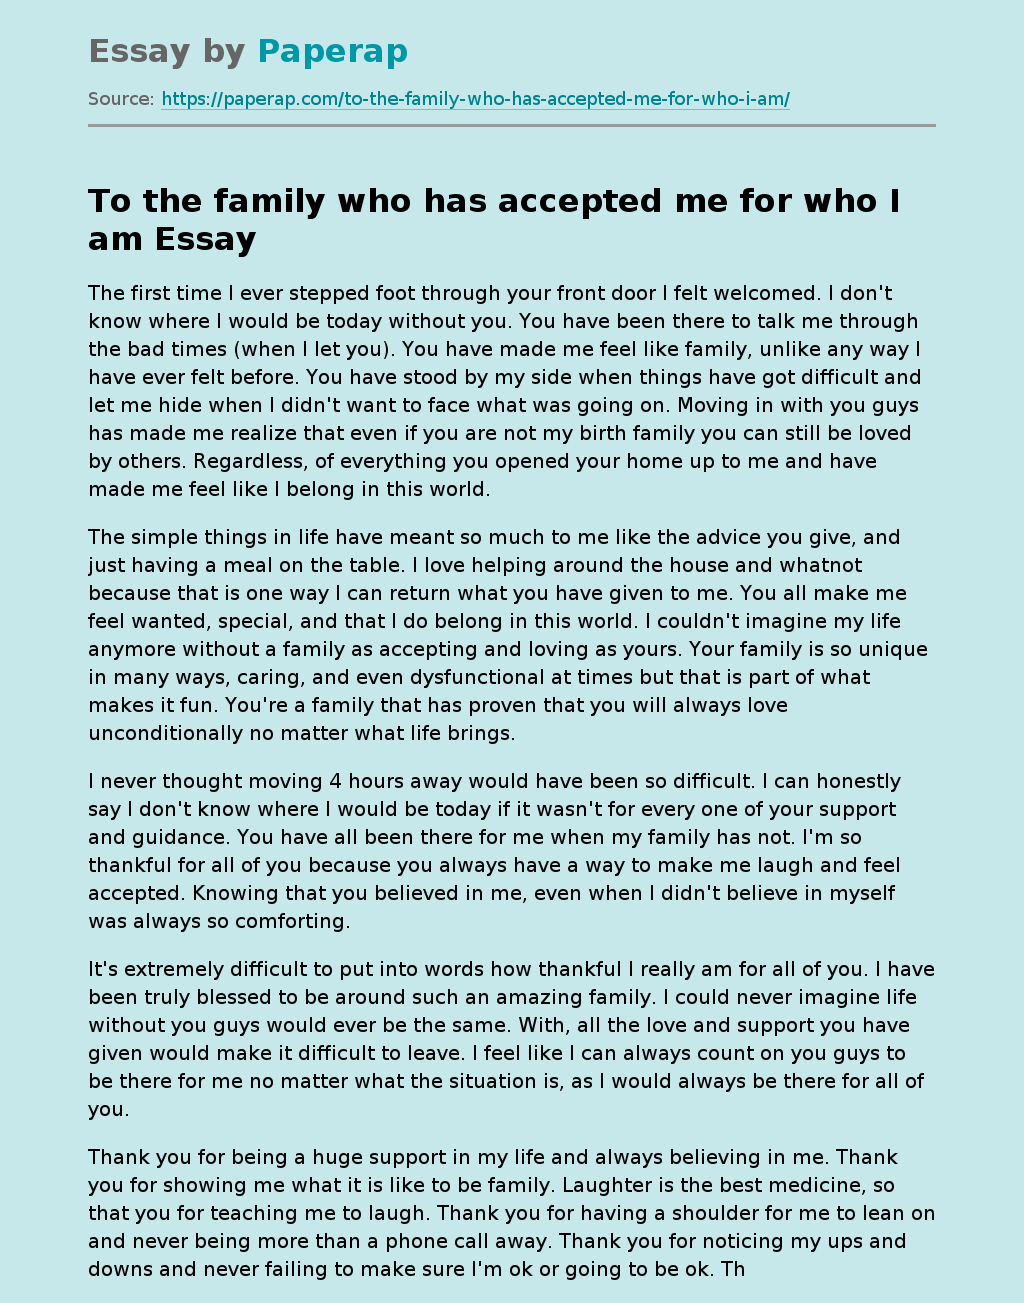 To the family who has accepted me for who I am